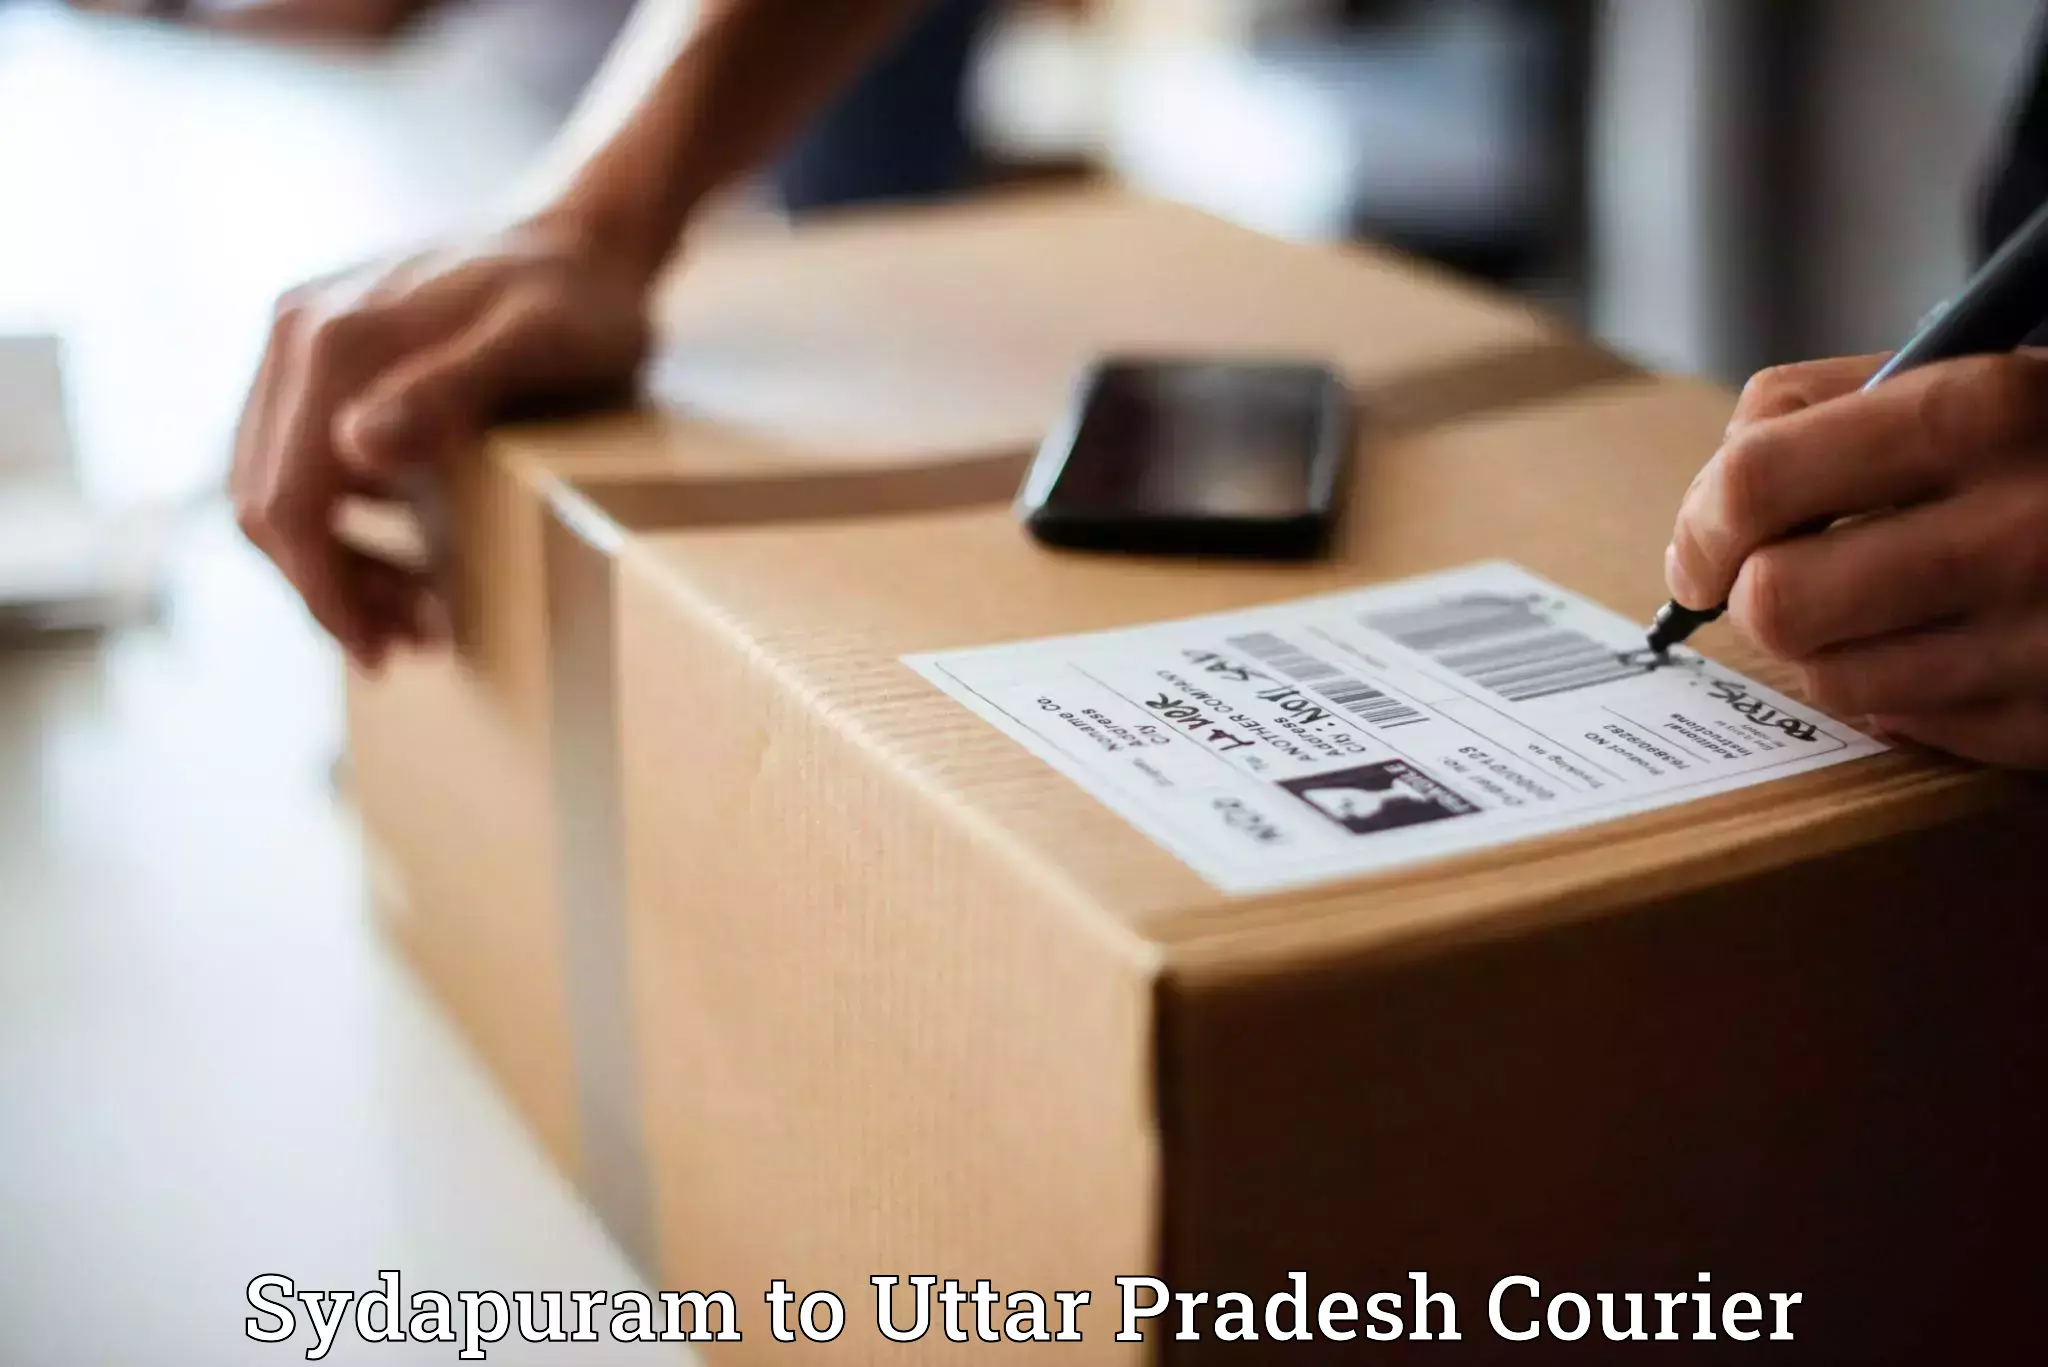 Multi-service courier options Sydapuram to Kanth